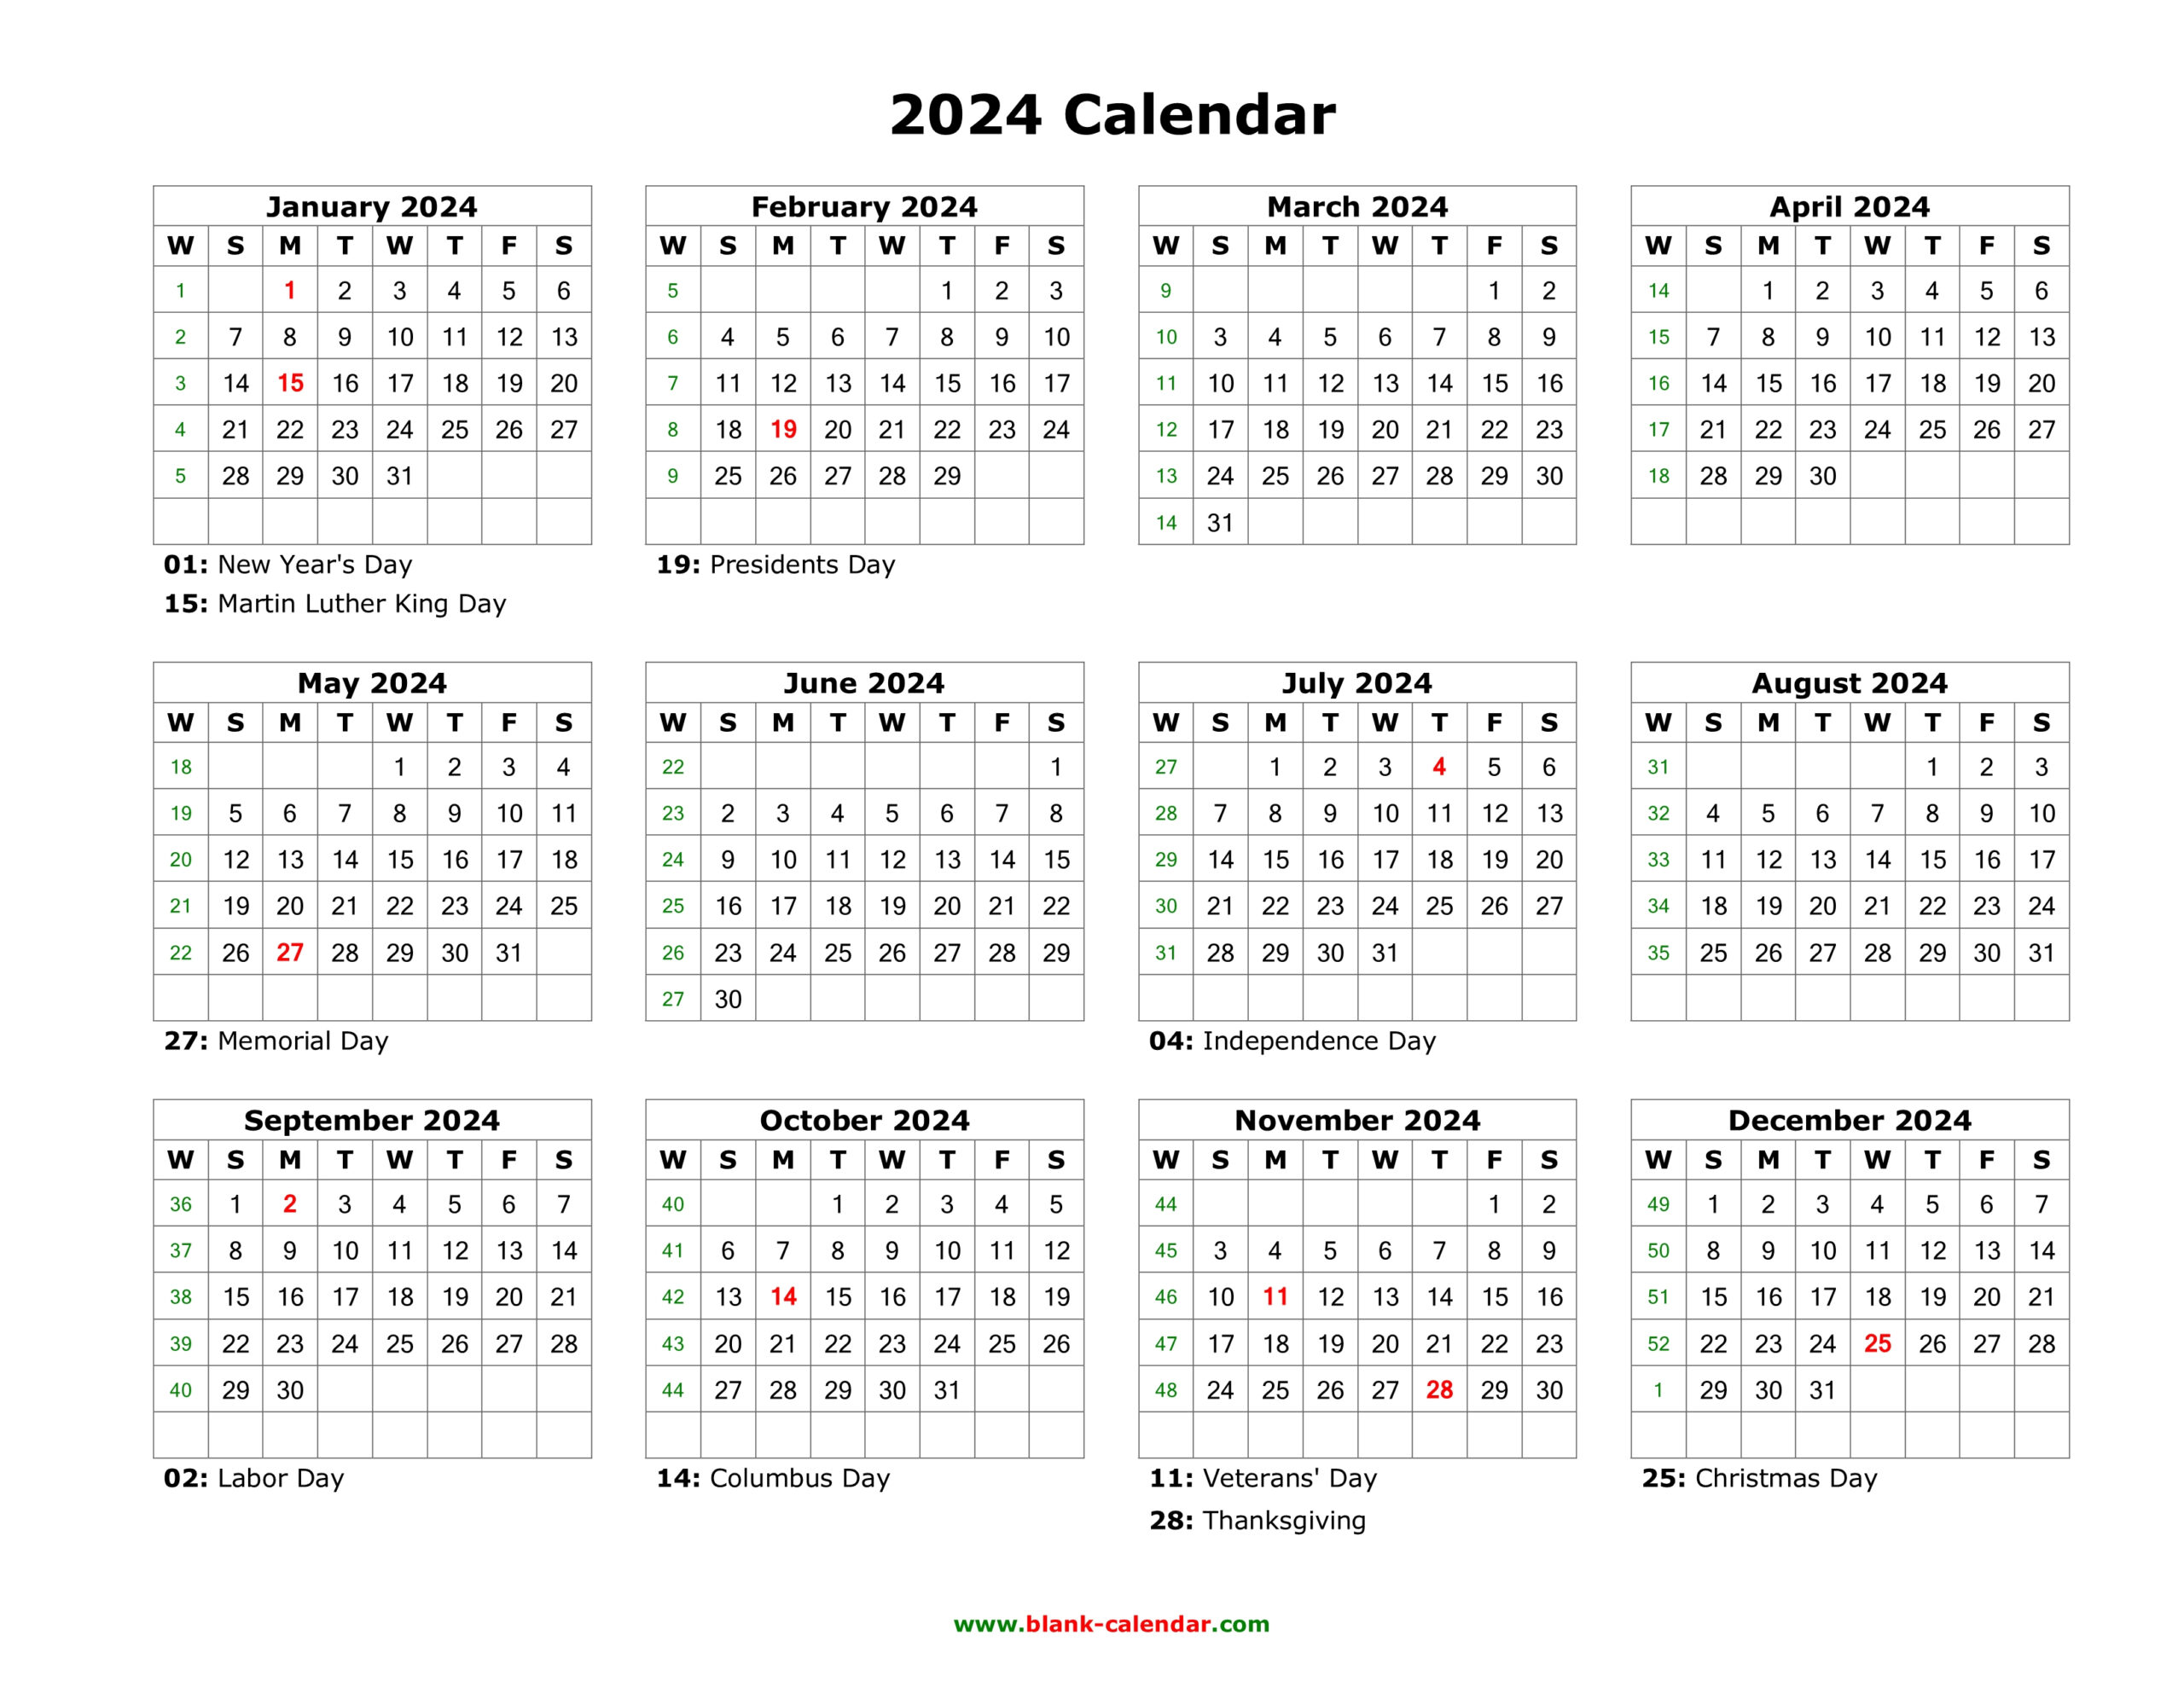 Download Blank Calendar 2024 With Us Holidays (12 Months On One for 2024 Calendar With Holidays Printable Word Document